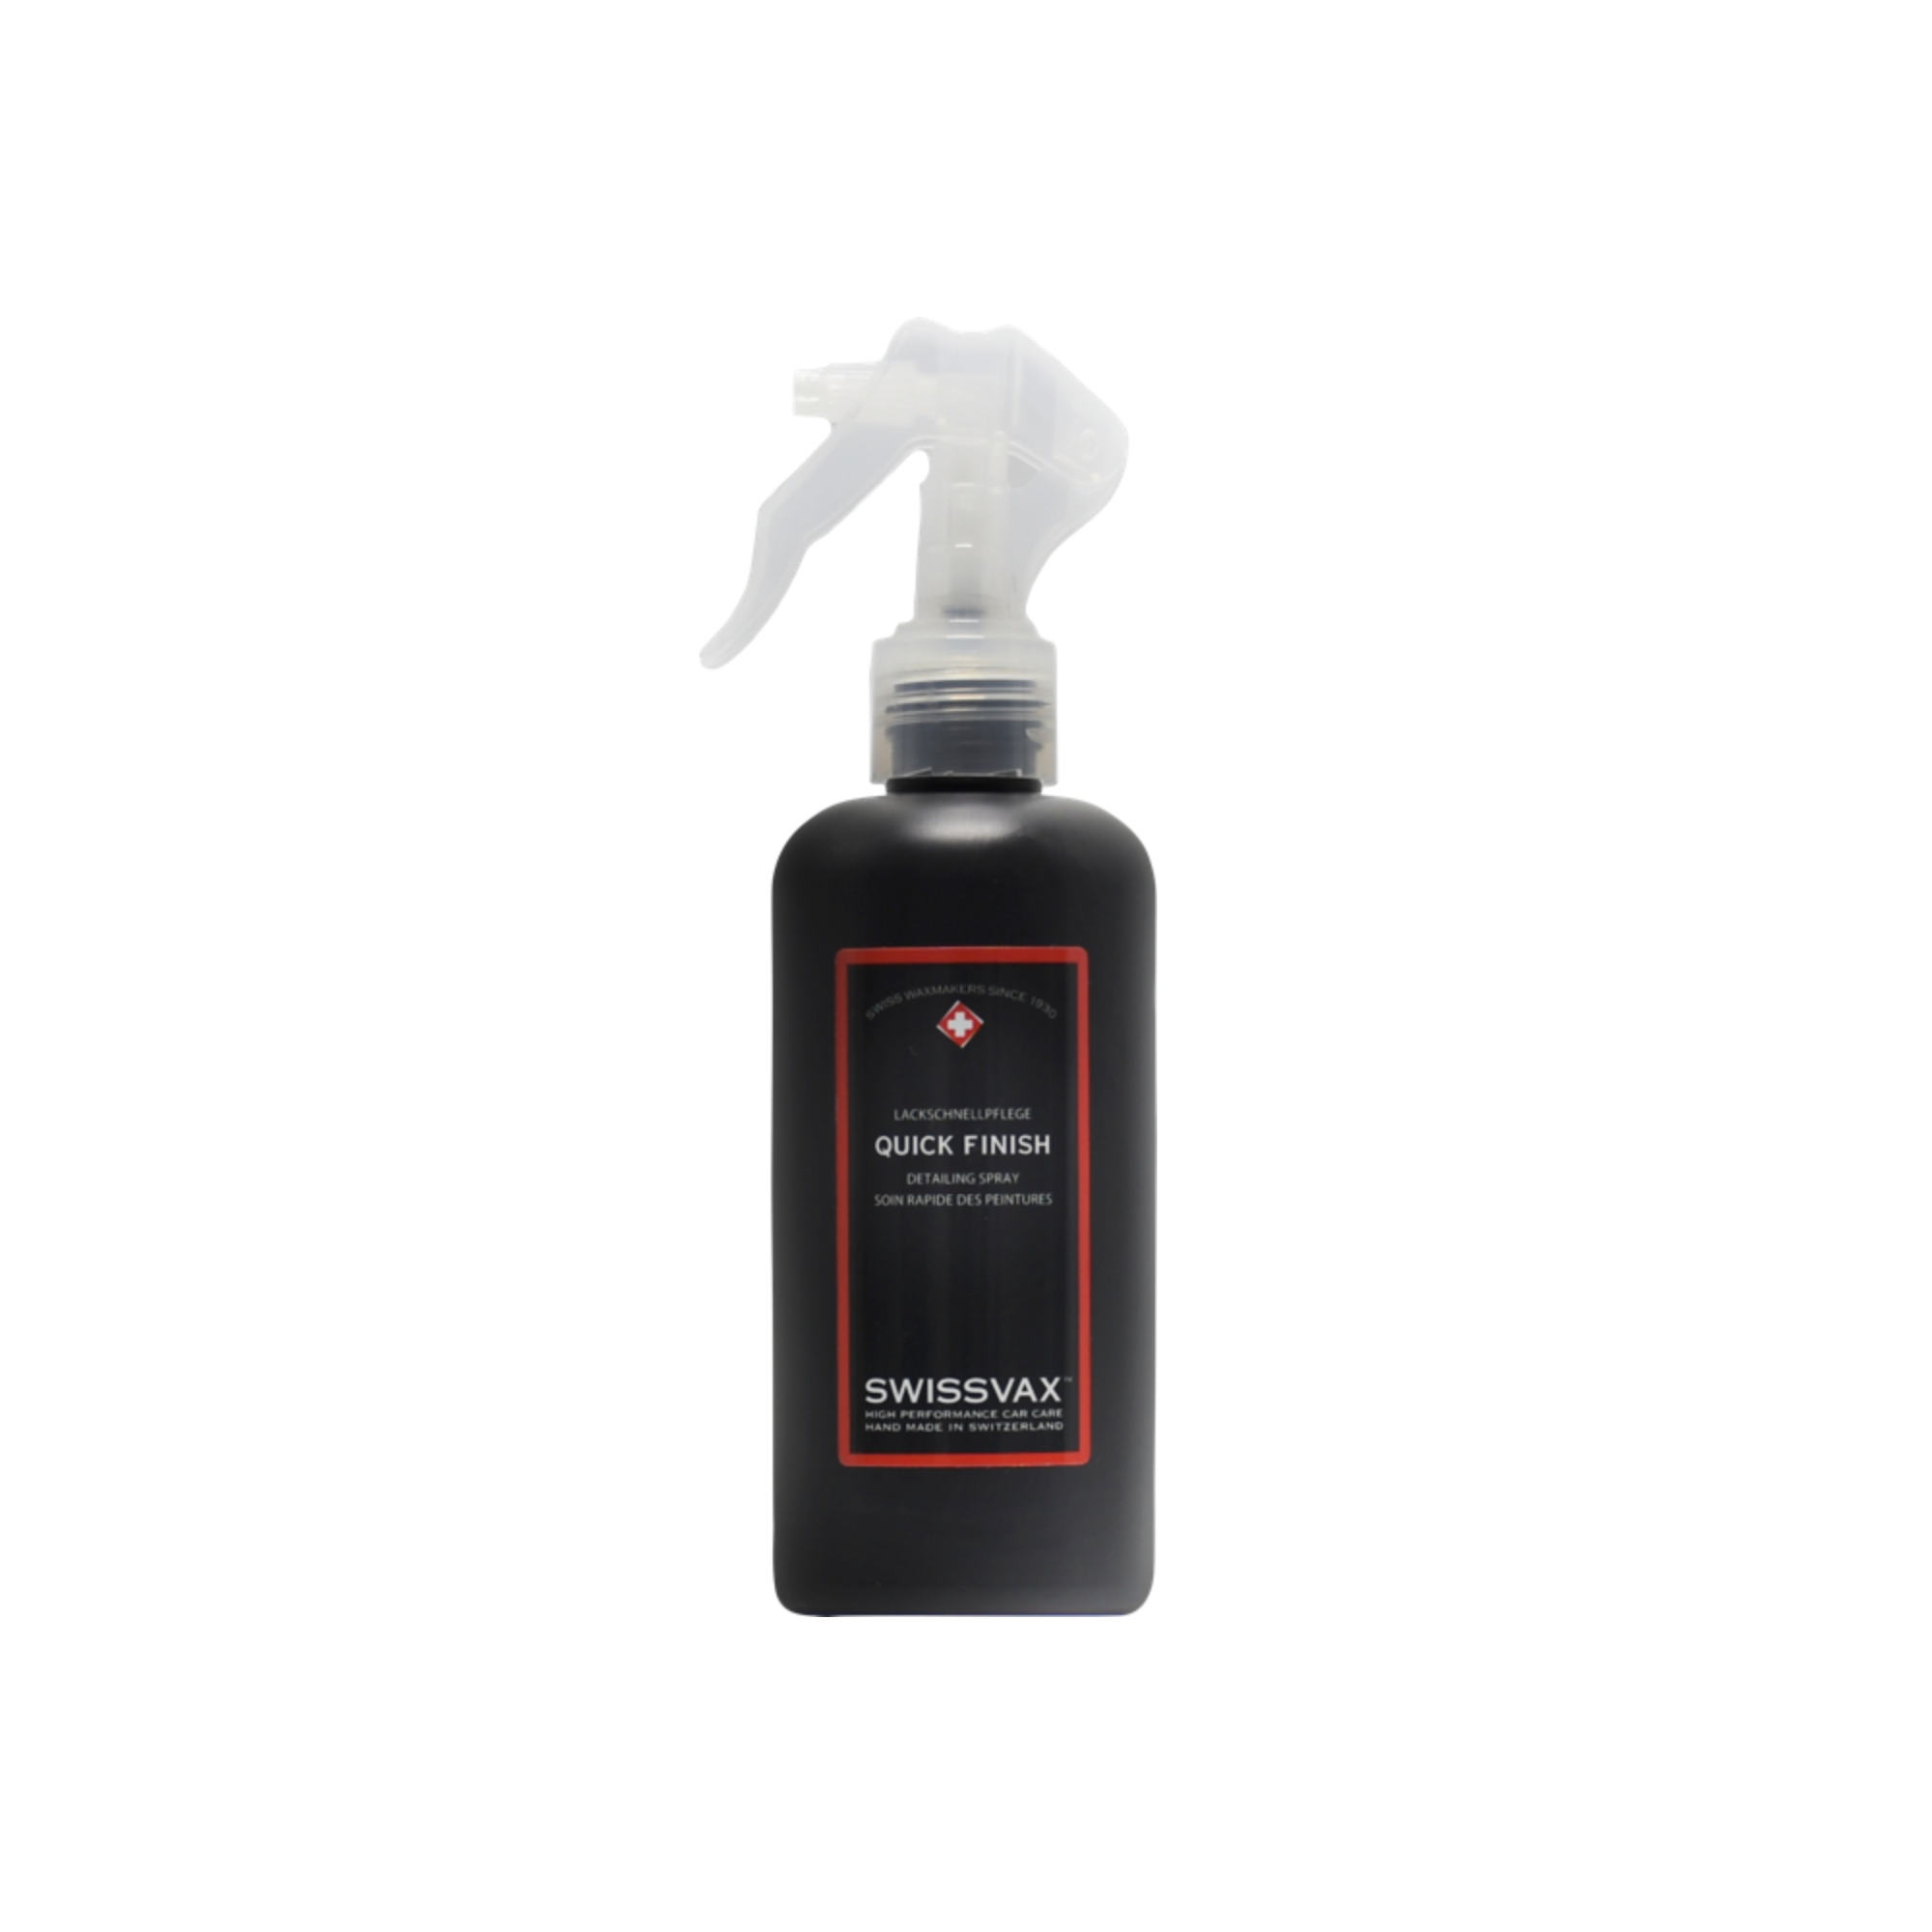 Swissvax QUICK FINISH, Quick Detailer and Cleaning Spray For All Surfaces